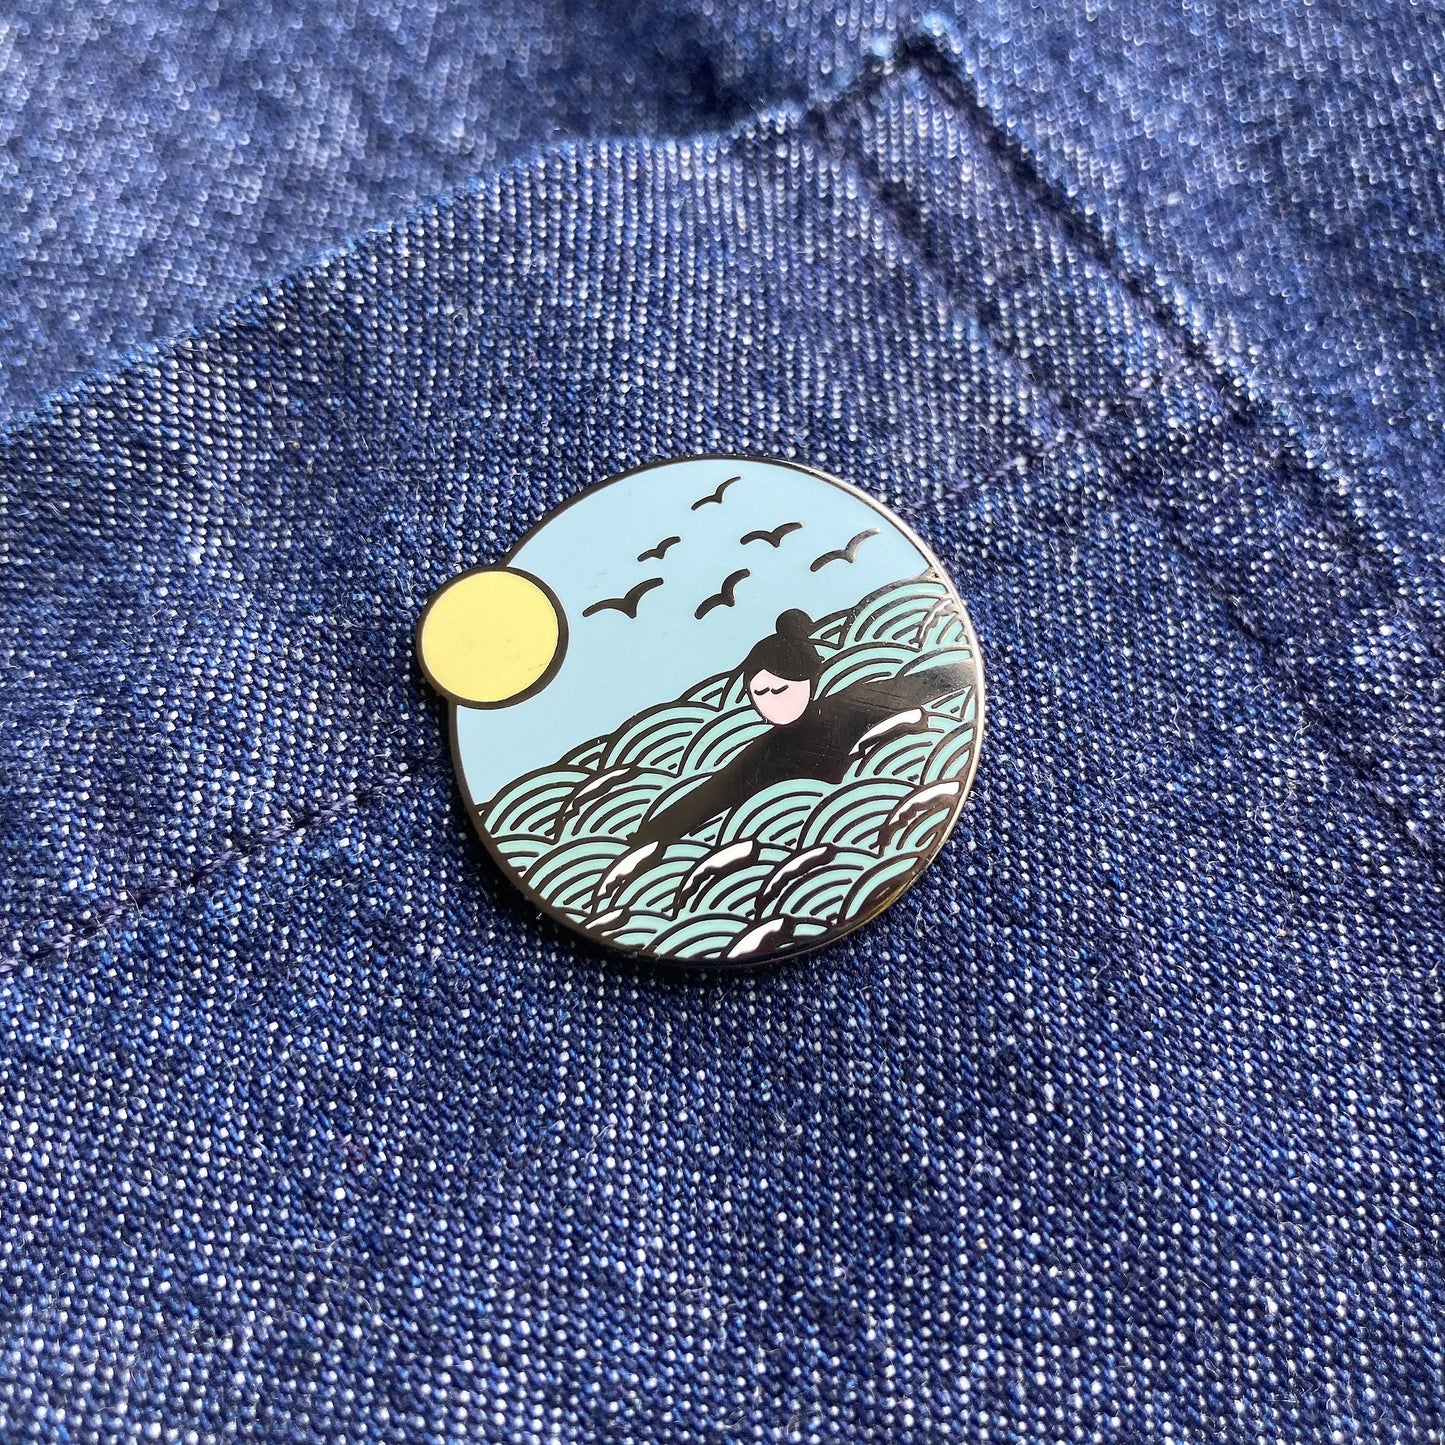 Bundle: Wild swim enamel pin and embroidered patch badge set